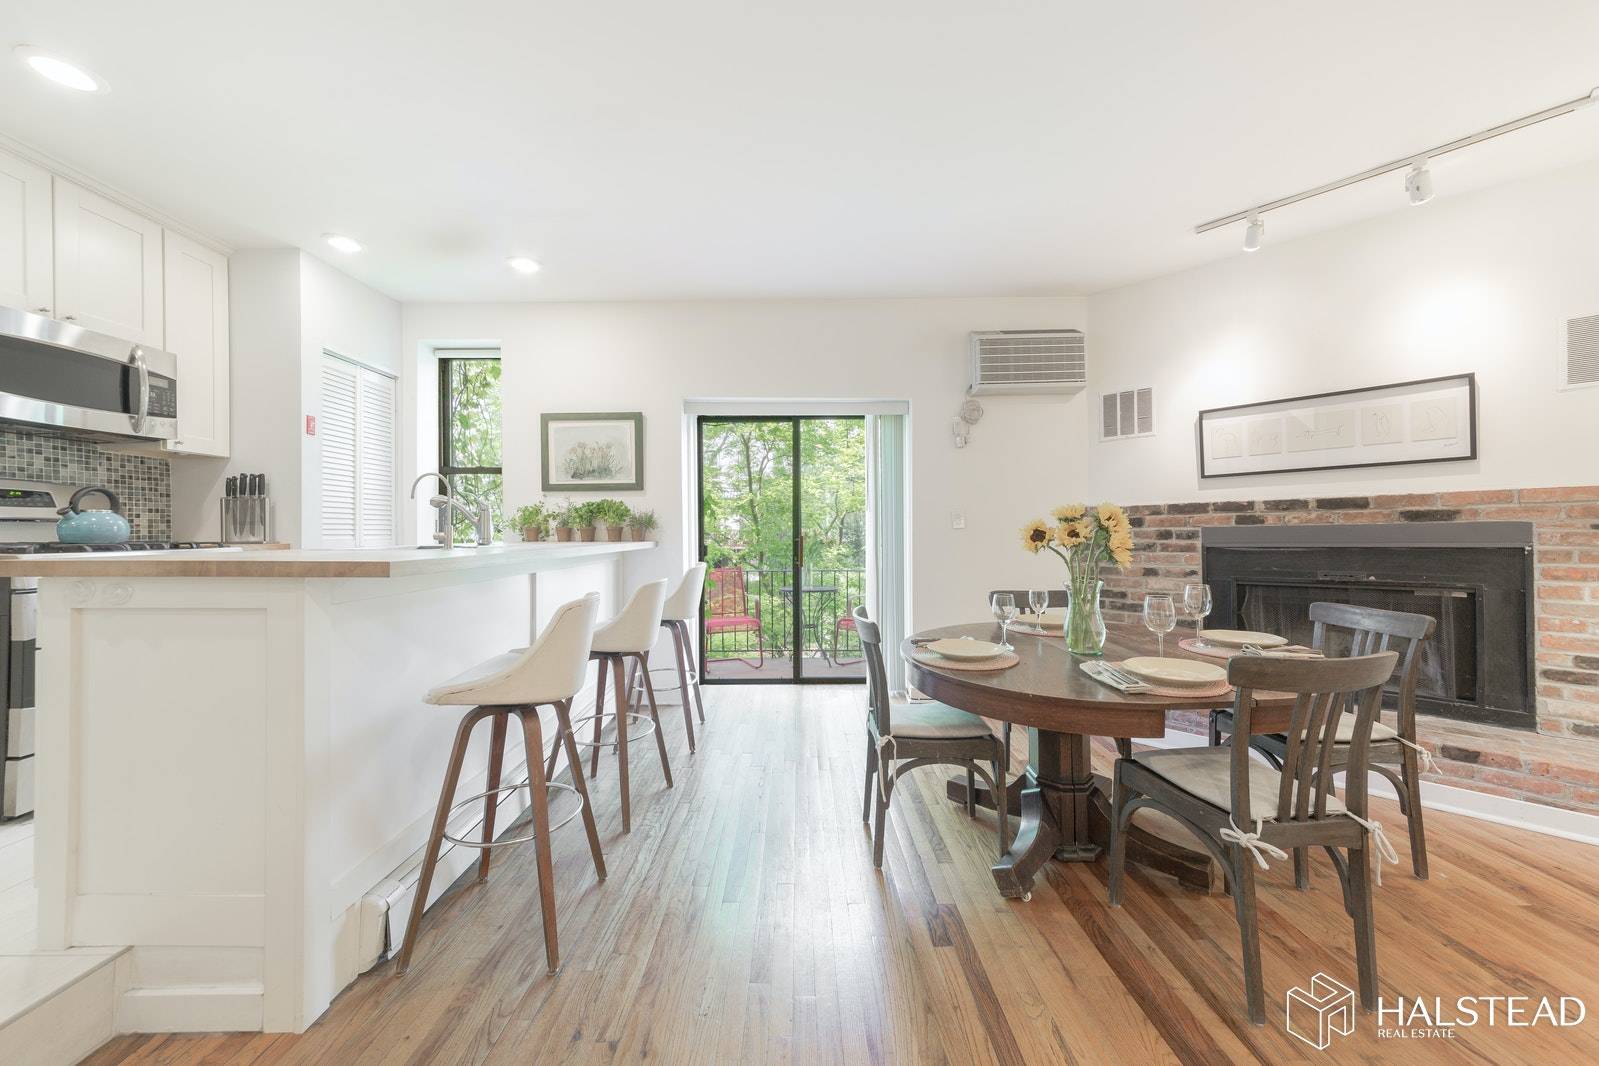 Gorgeous, newly renovated, fully furnished 2 bed 1 bath townhouse apartment on a beautiful block in prime Boerum Hill.